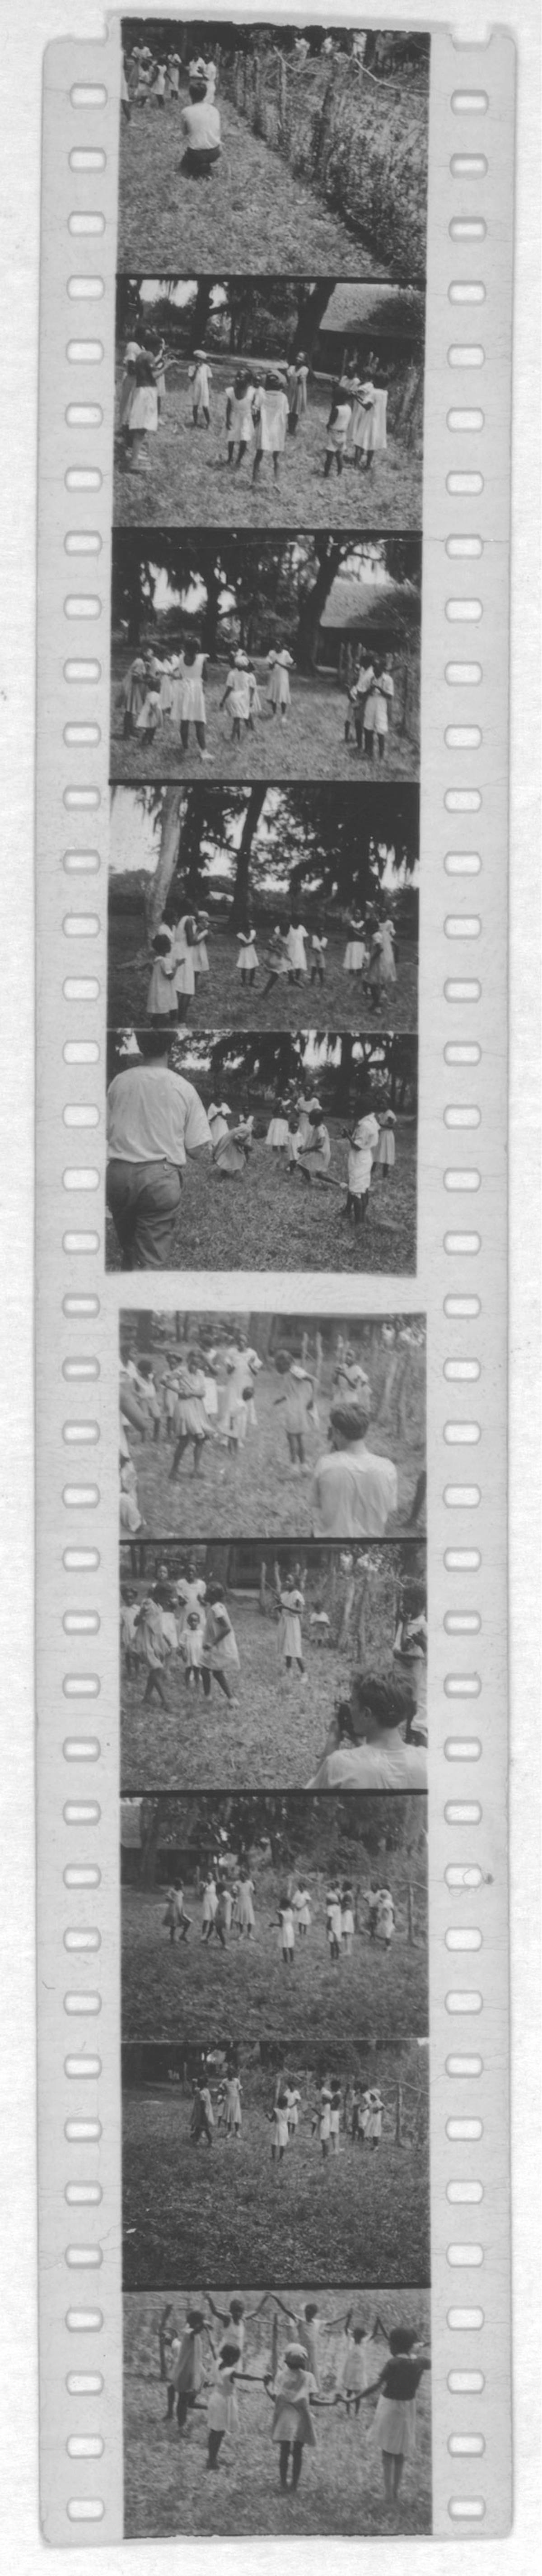 Groups of people dancing (Alan Lomax is seen making a film in one shot). Photos probably from the Georgia, Florida, and Bahamas expedition, 1935. (Alan Lomax Collection, Library of Congress)